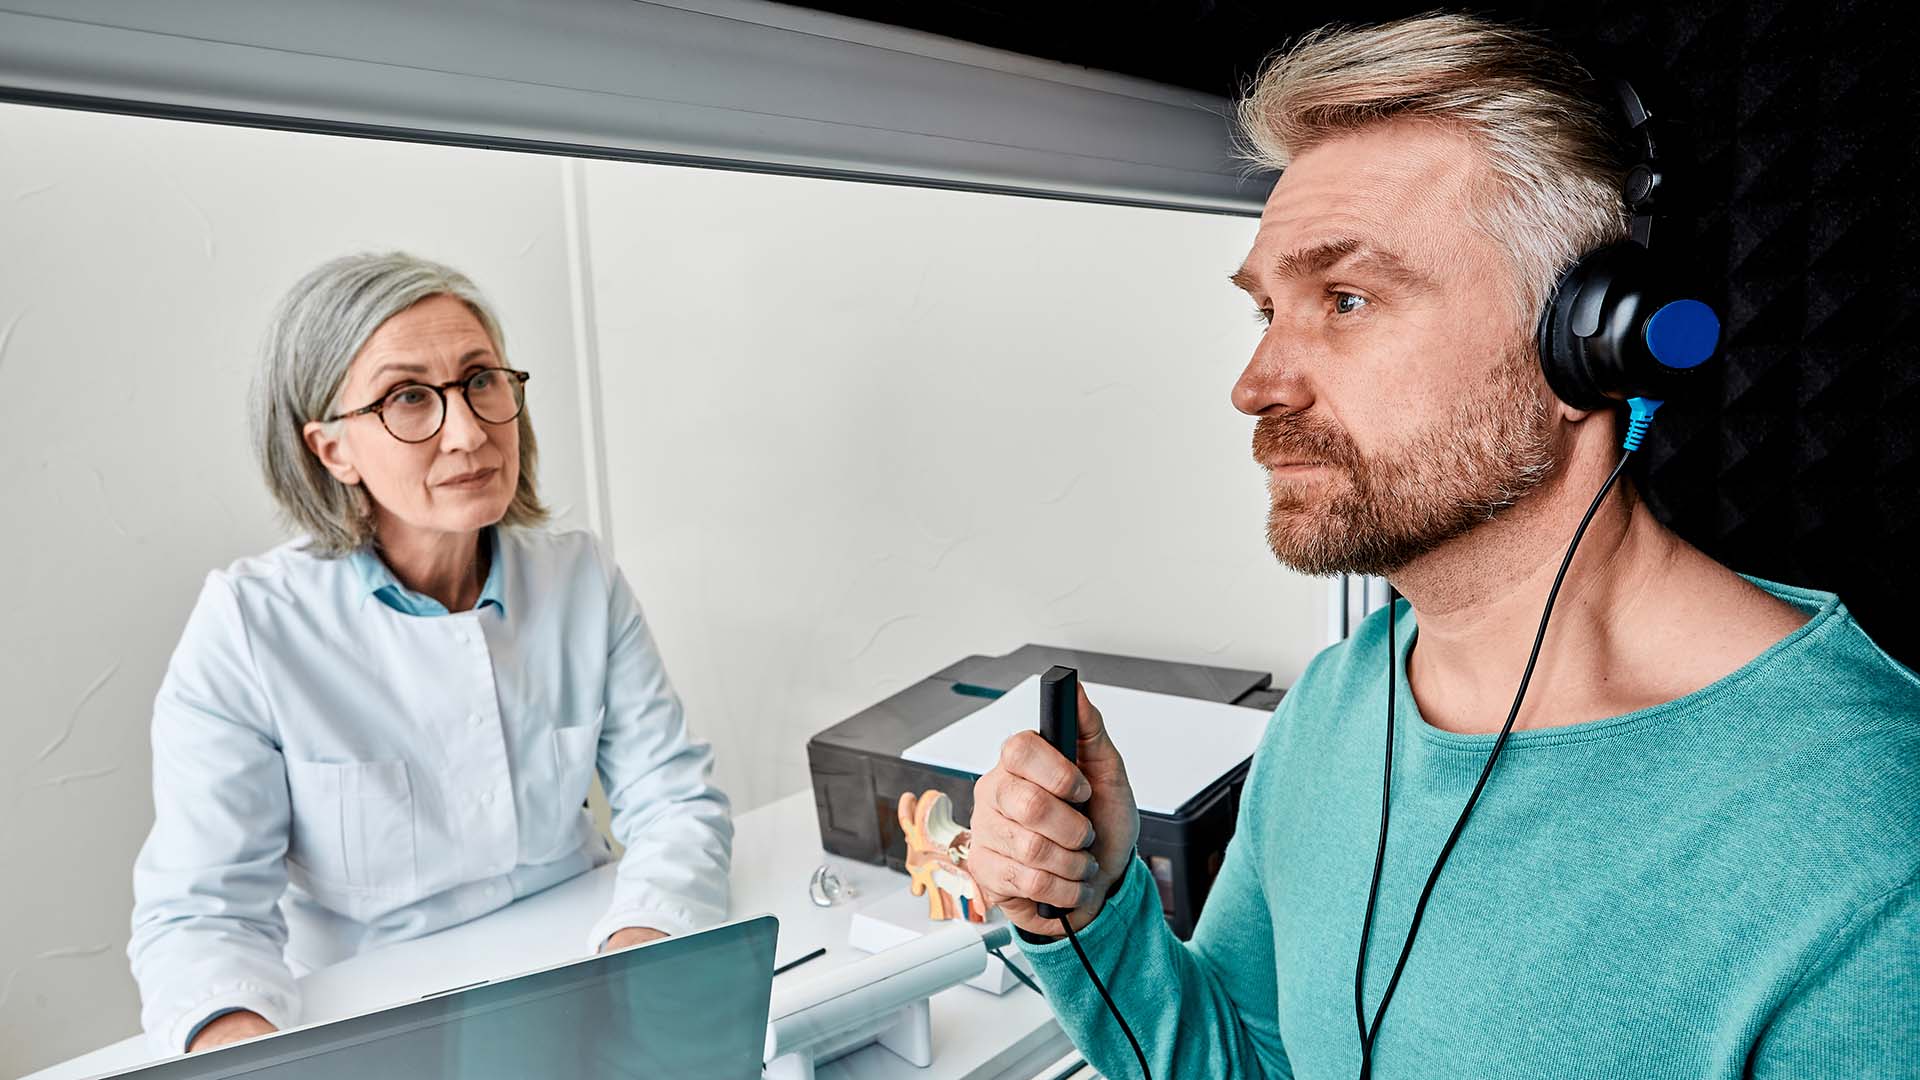 Man getting professional hearing test with an audiologist